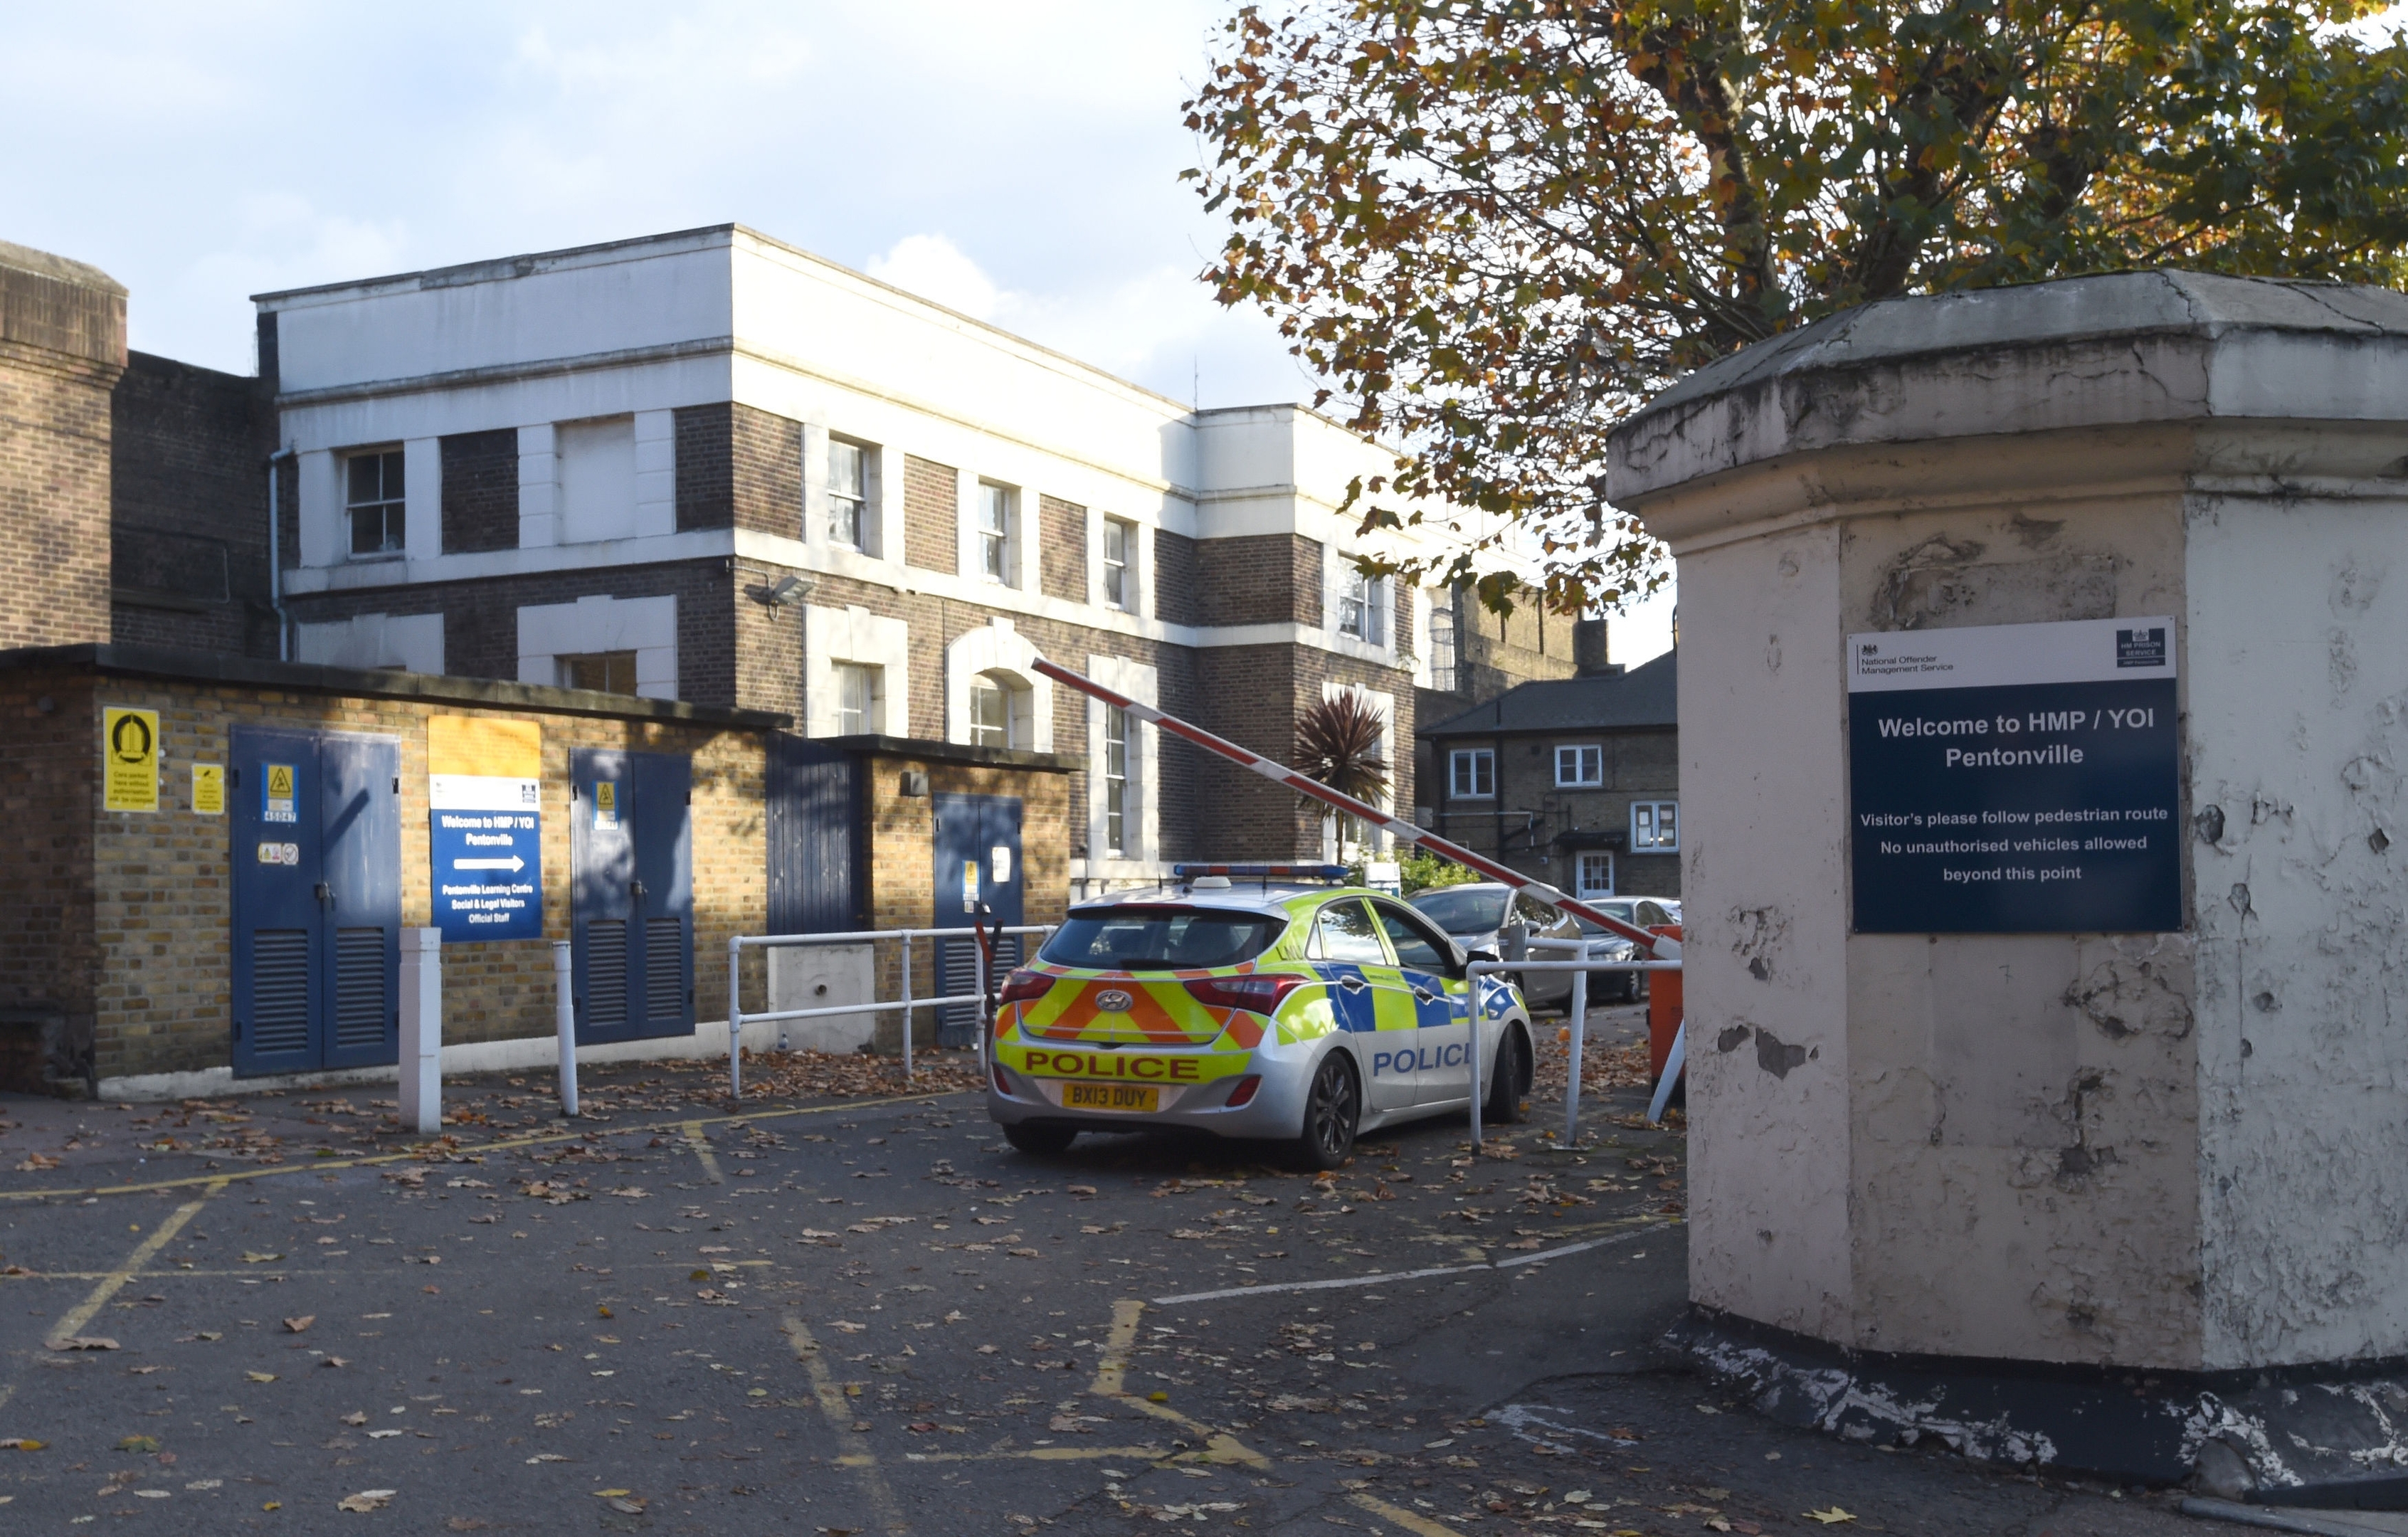 A general view of Pentonville Prison, north London, where two inmates escaped from, it has emerged.